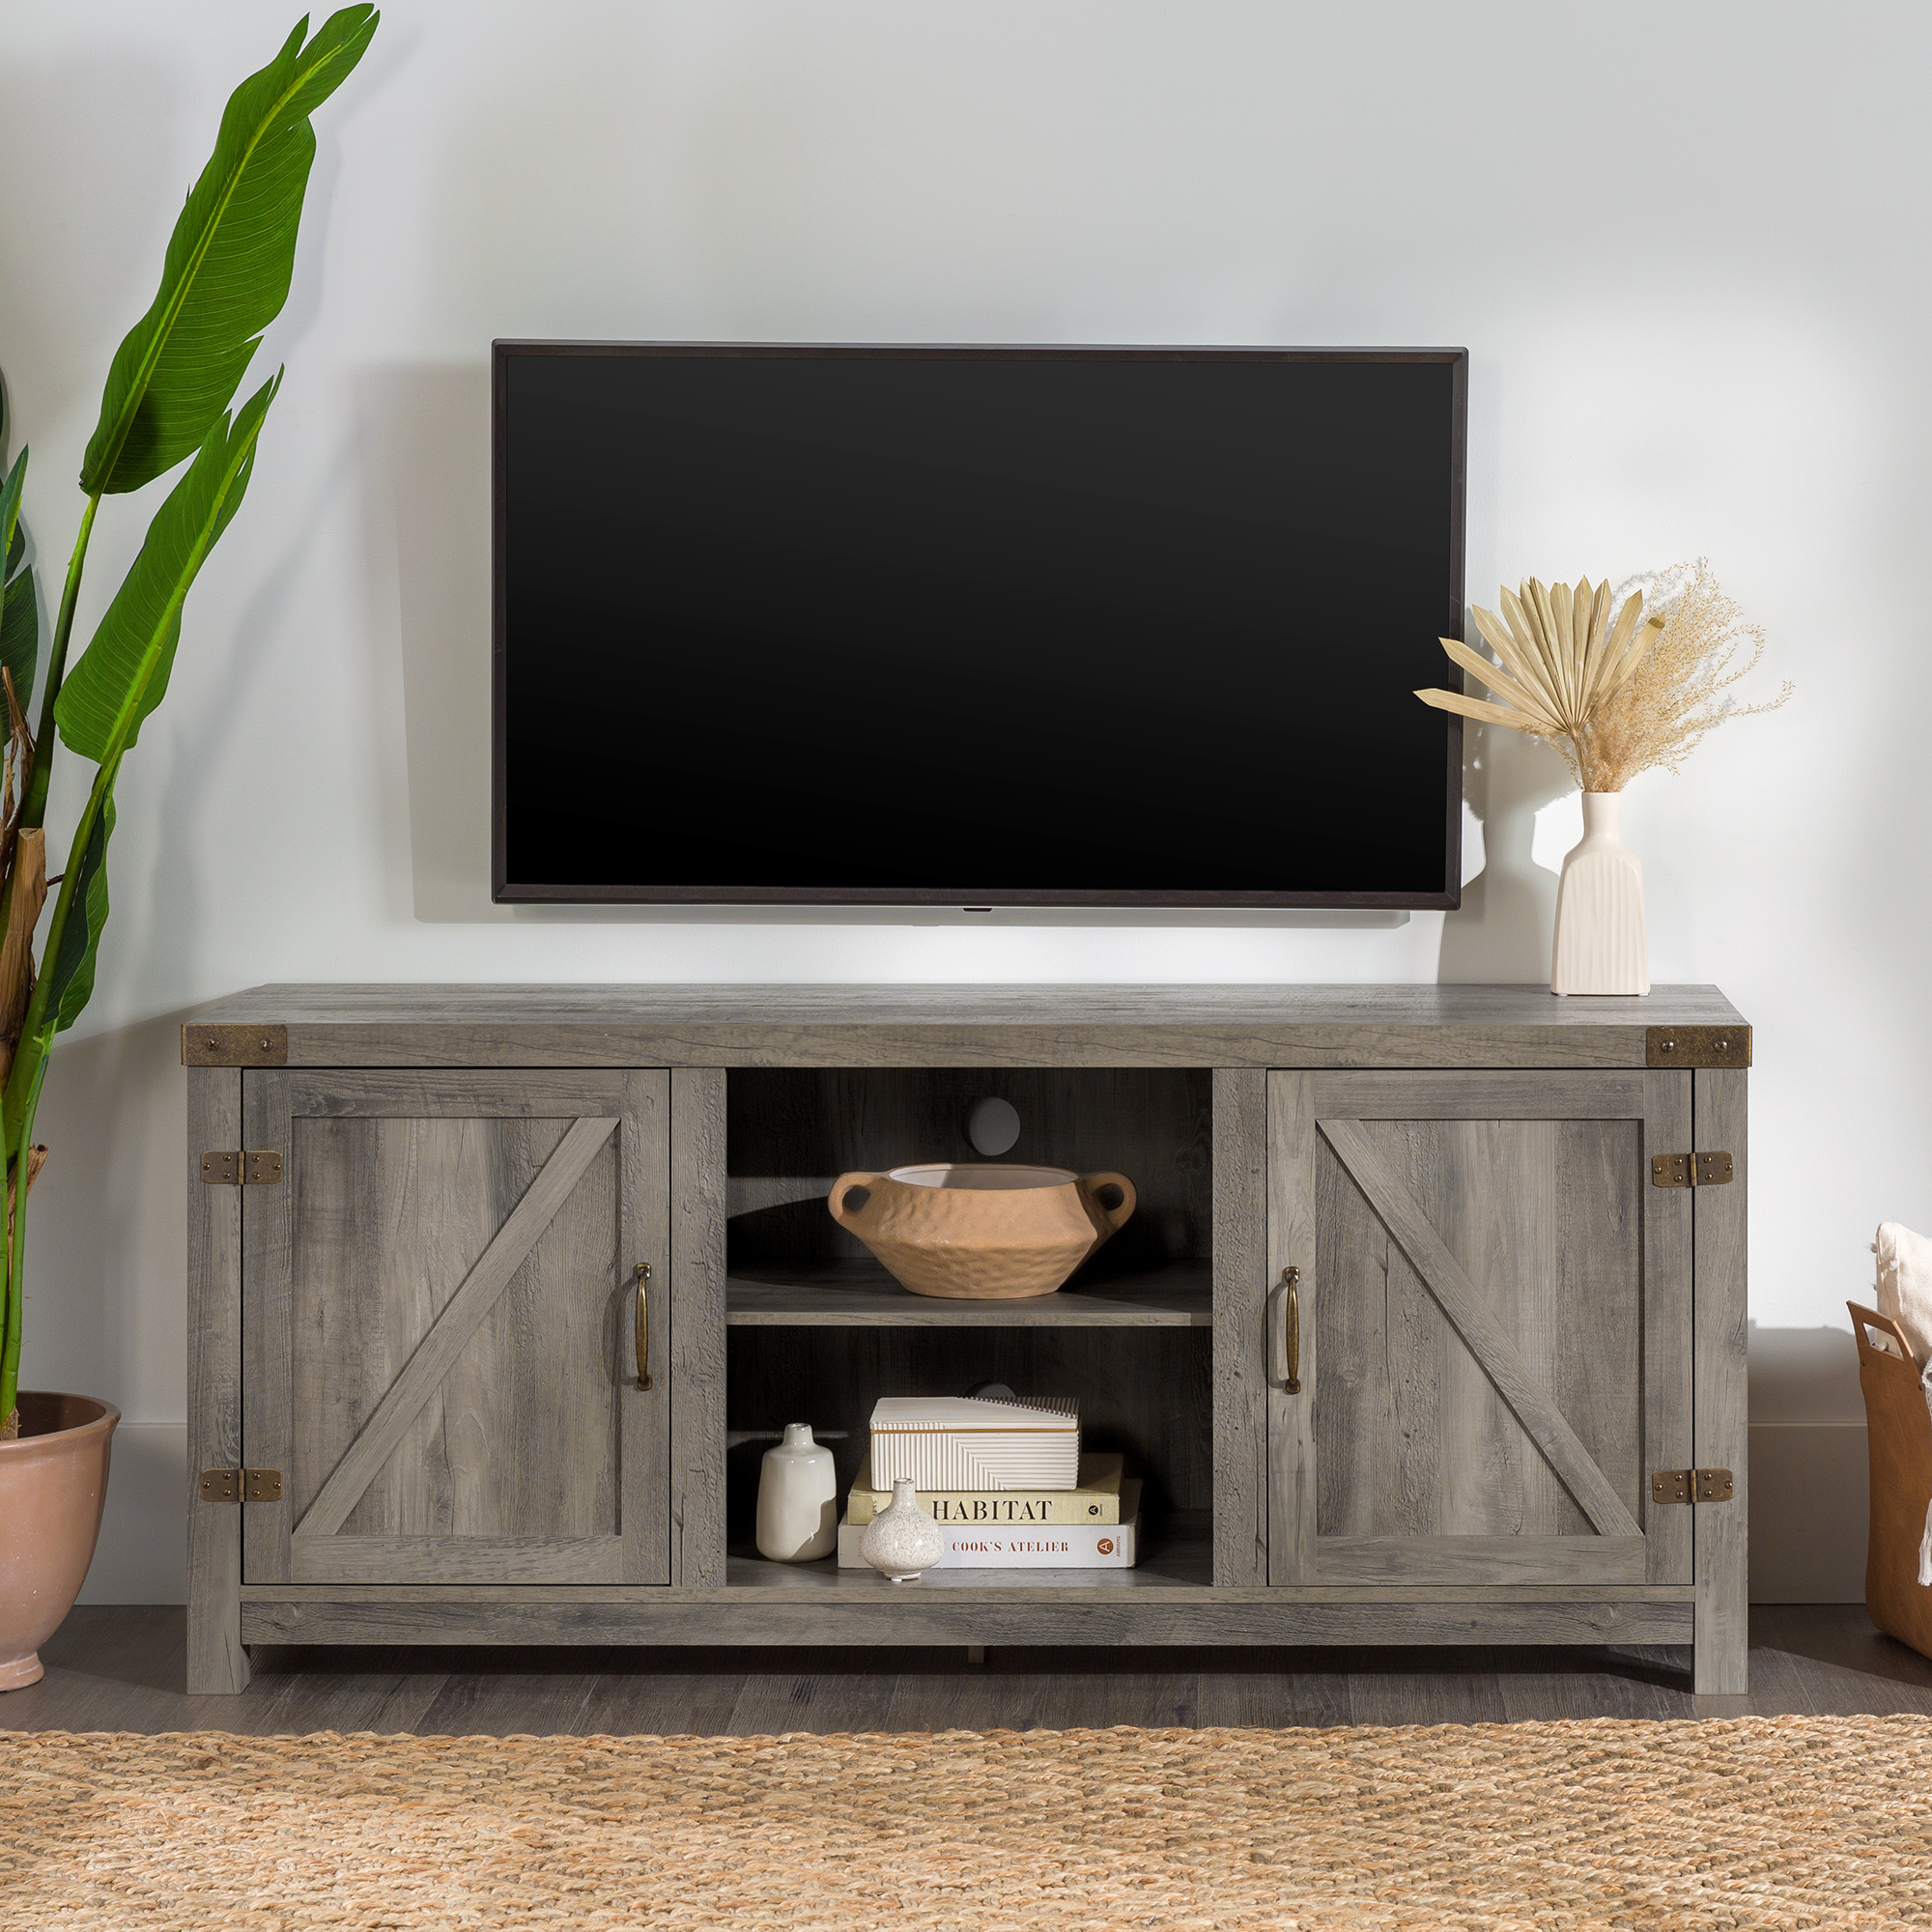 Walker Edison Modern Farmhouse Barn Door TV Stand for TVs up to 65", Grey Wash - image 3 of 22